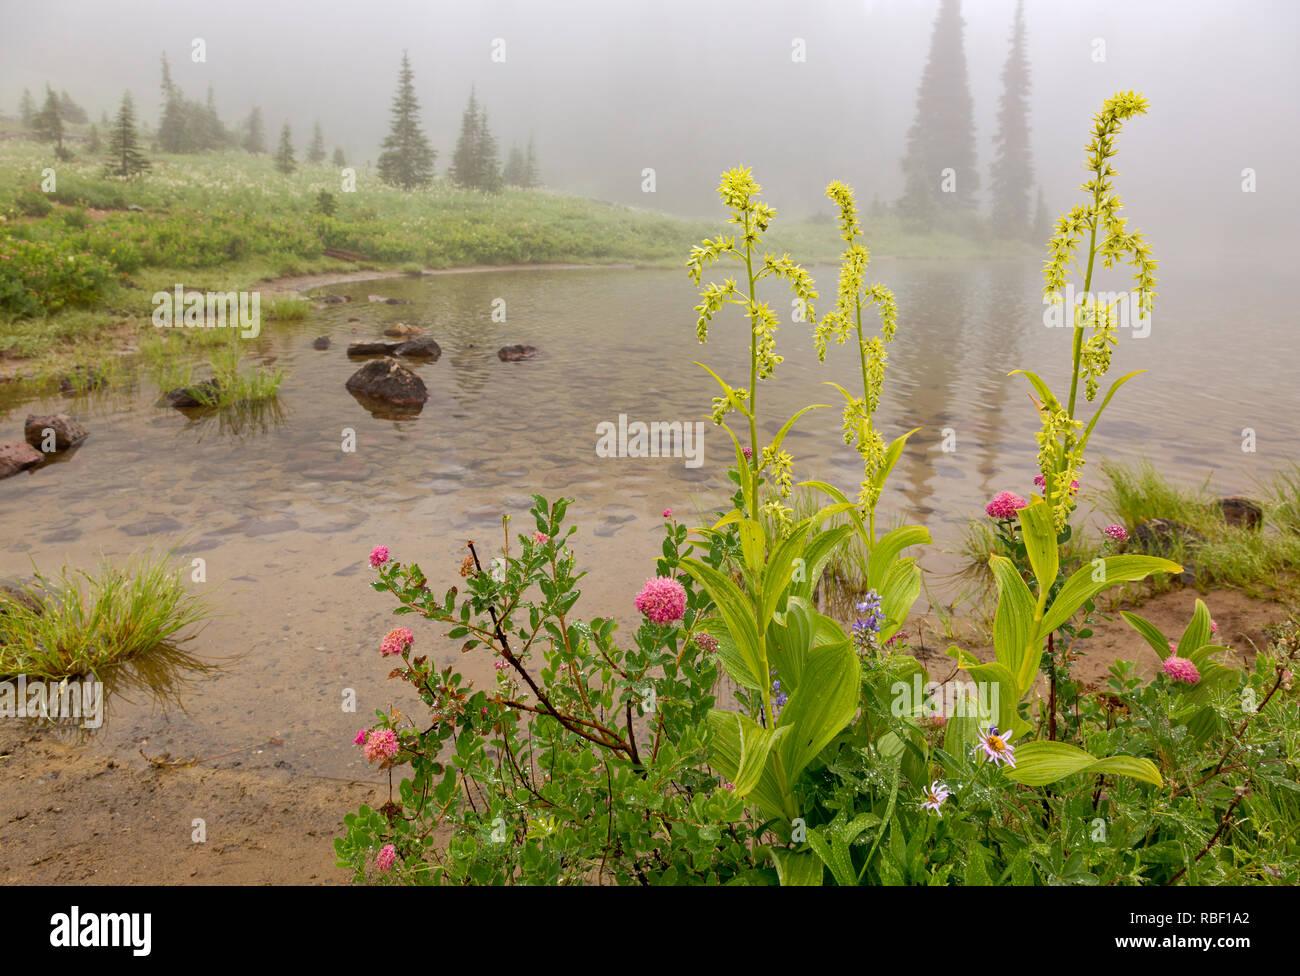 WA15716-00...WASHINGTON - Alpine aster, mountain daisy, lupine and green hellebore growing on the shores of Tipsoo Lake in Mount Rainier National Park Stock Photo